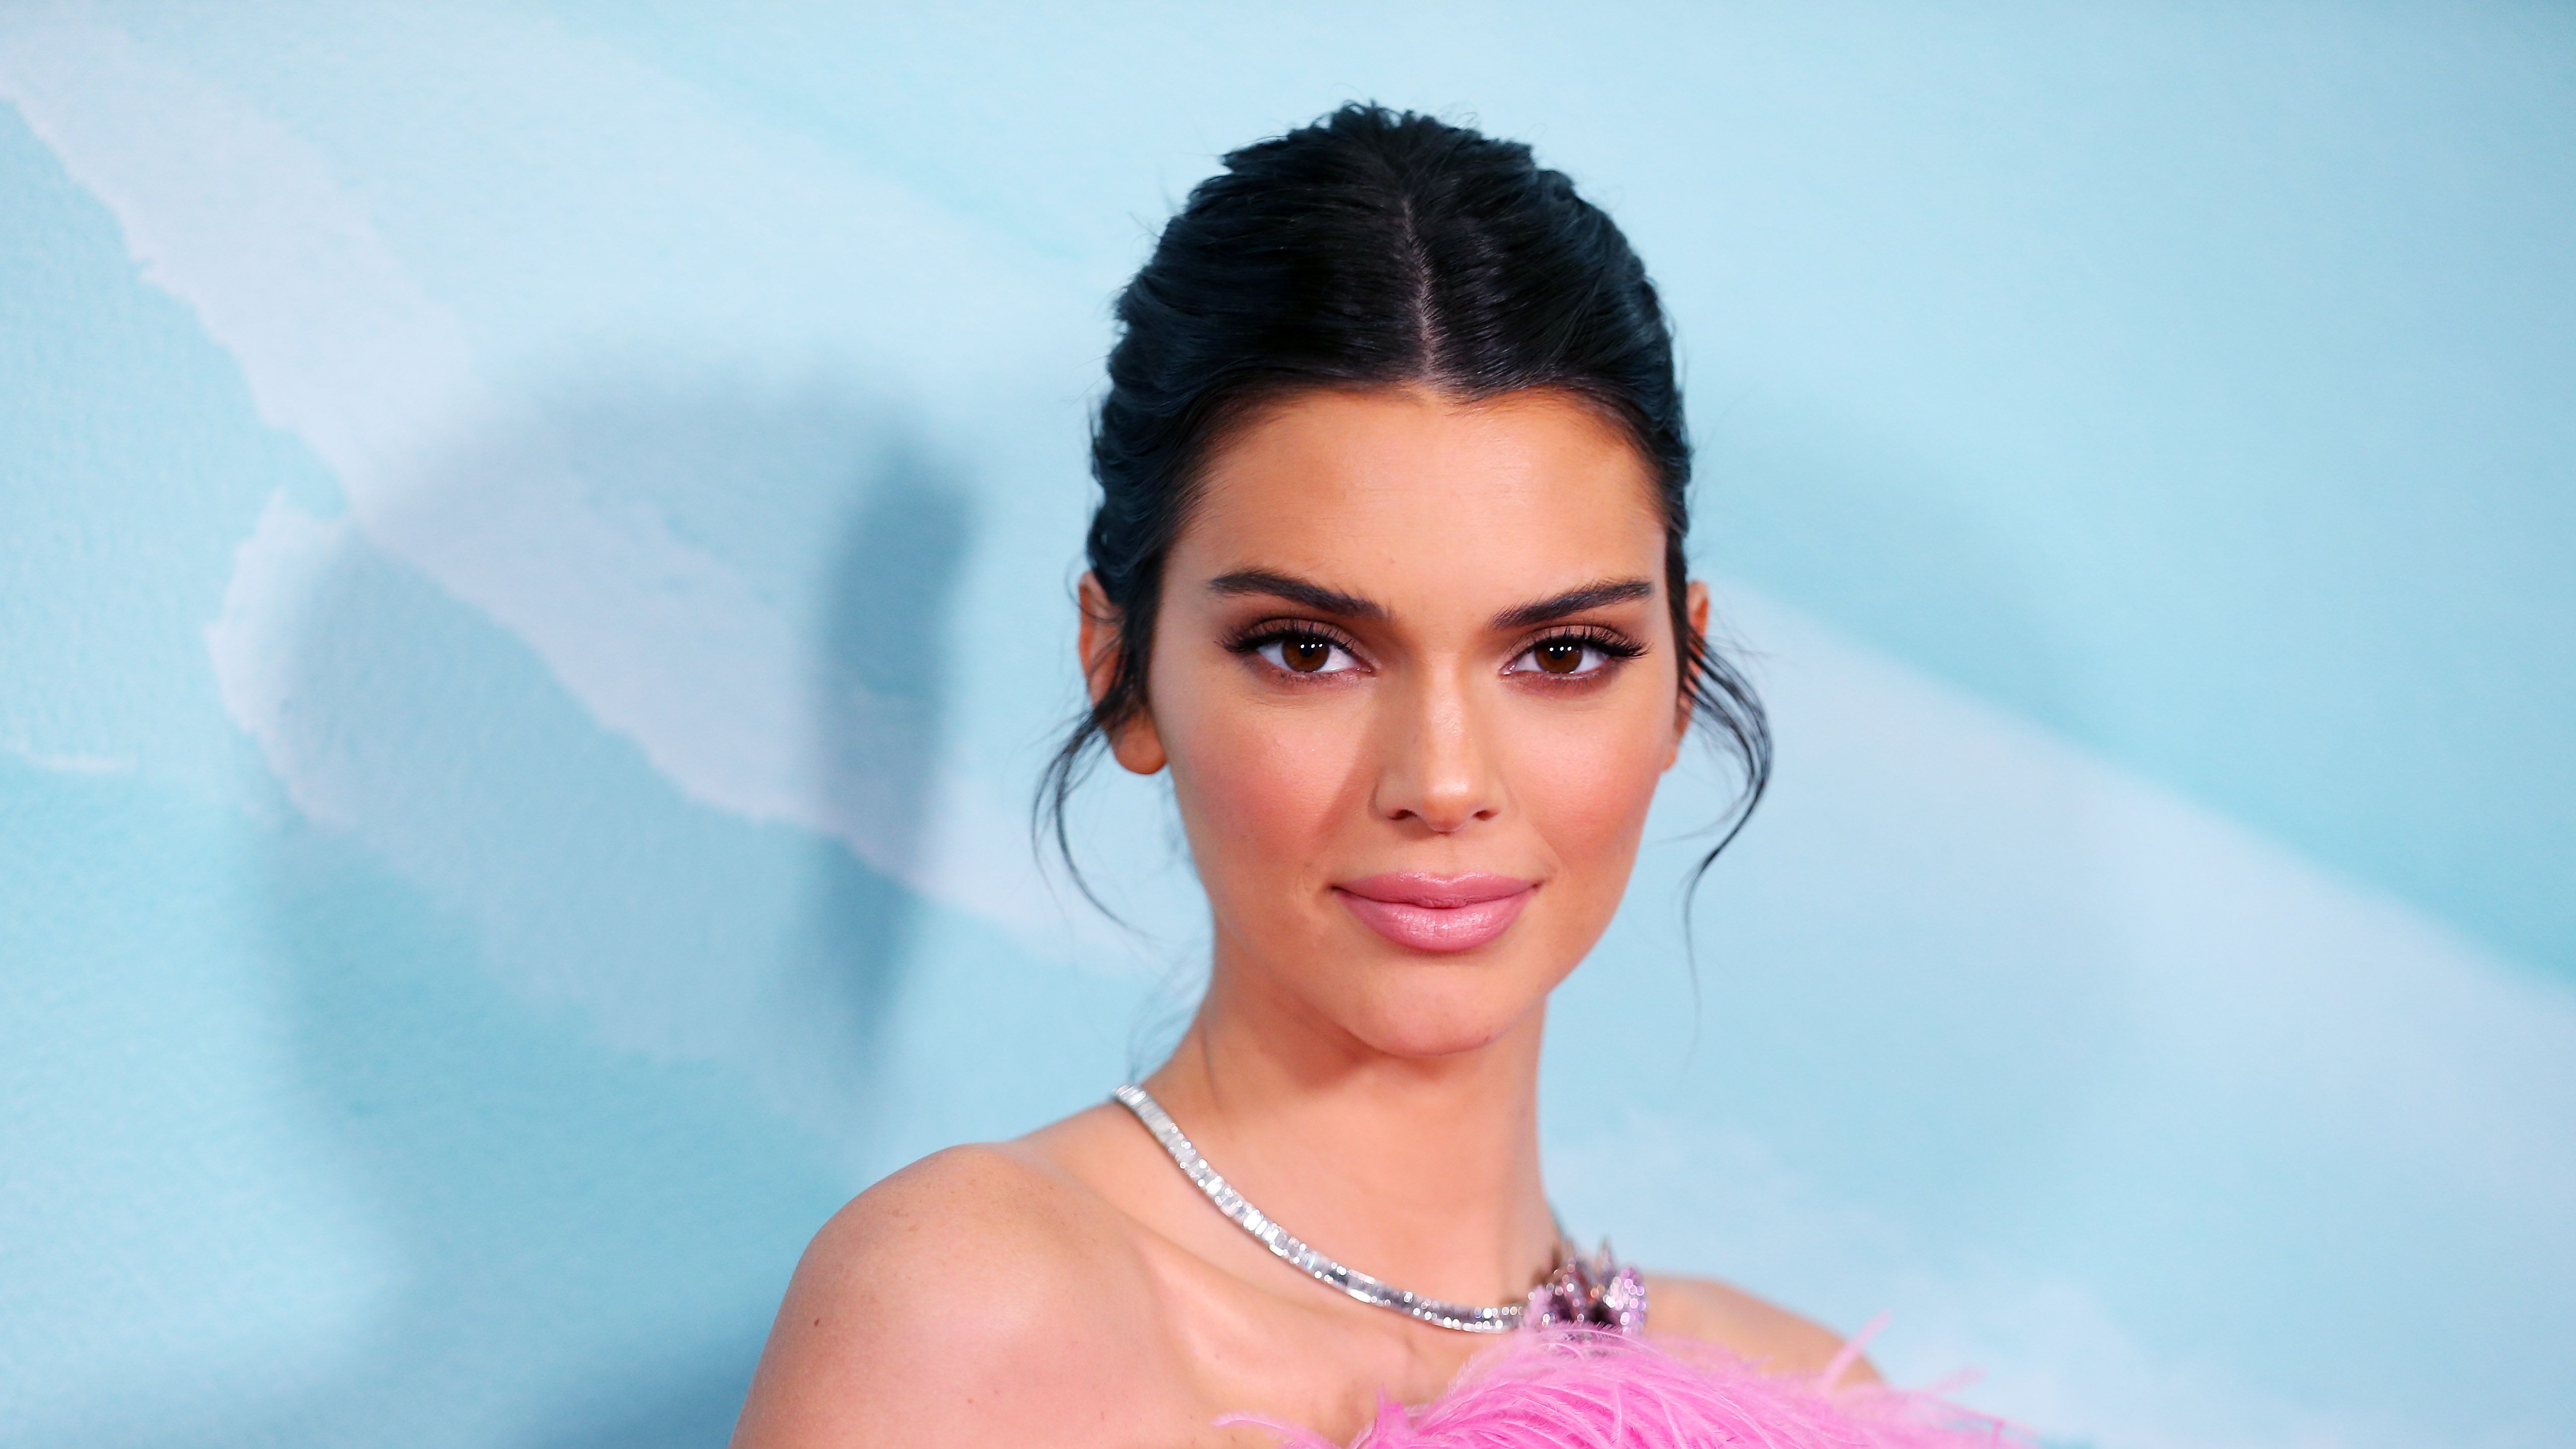 15 Times Kendall Jenner Showed Her Love For Sheer Clothing